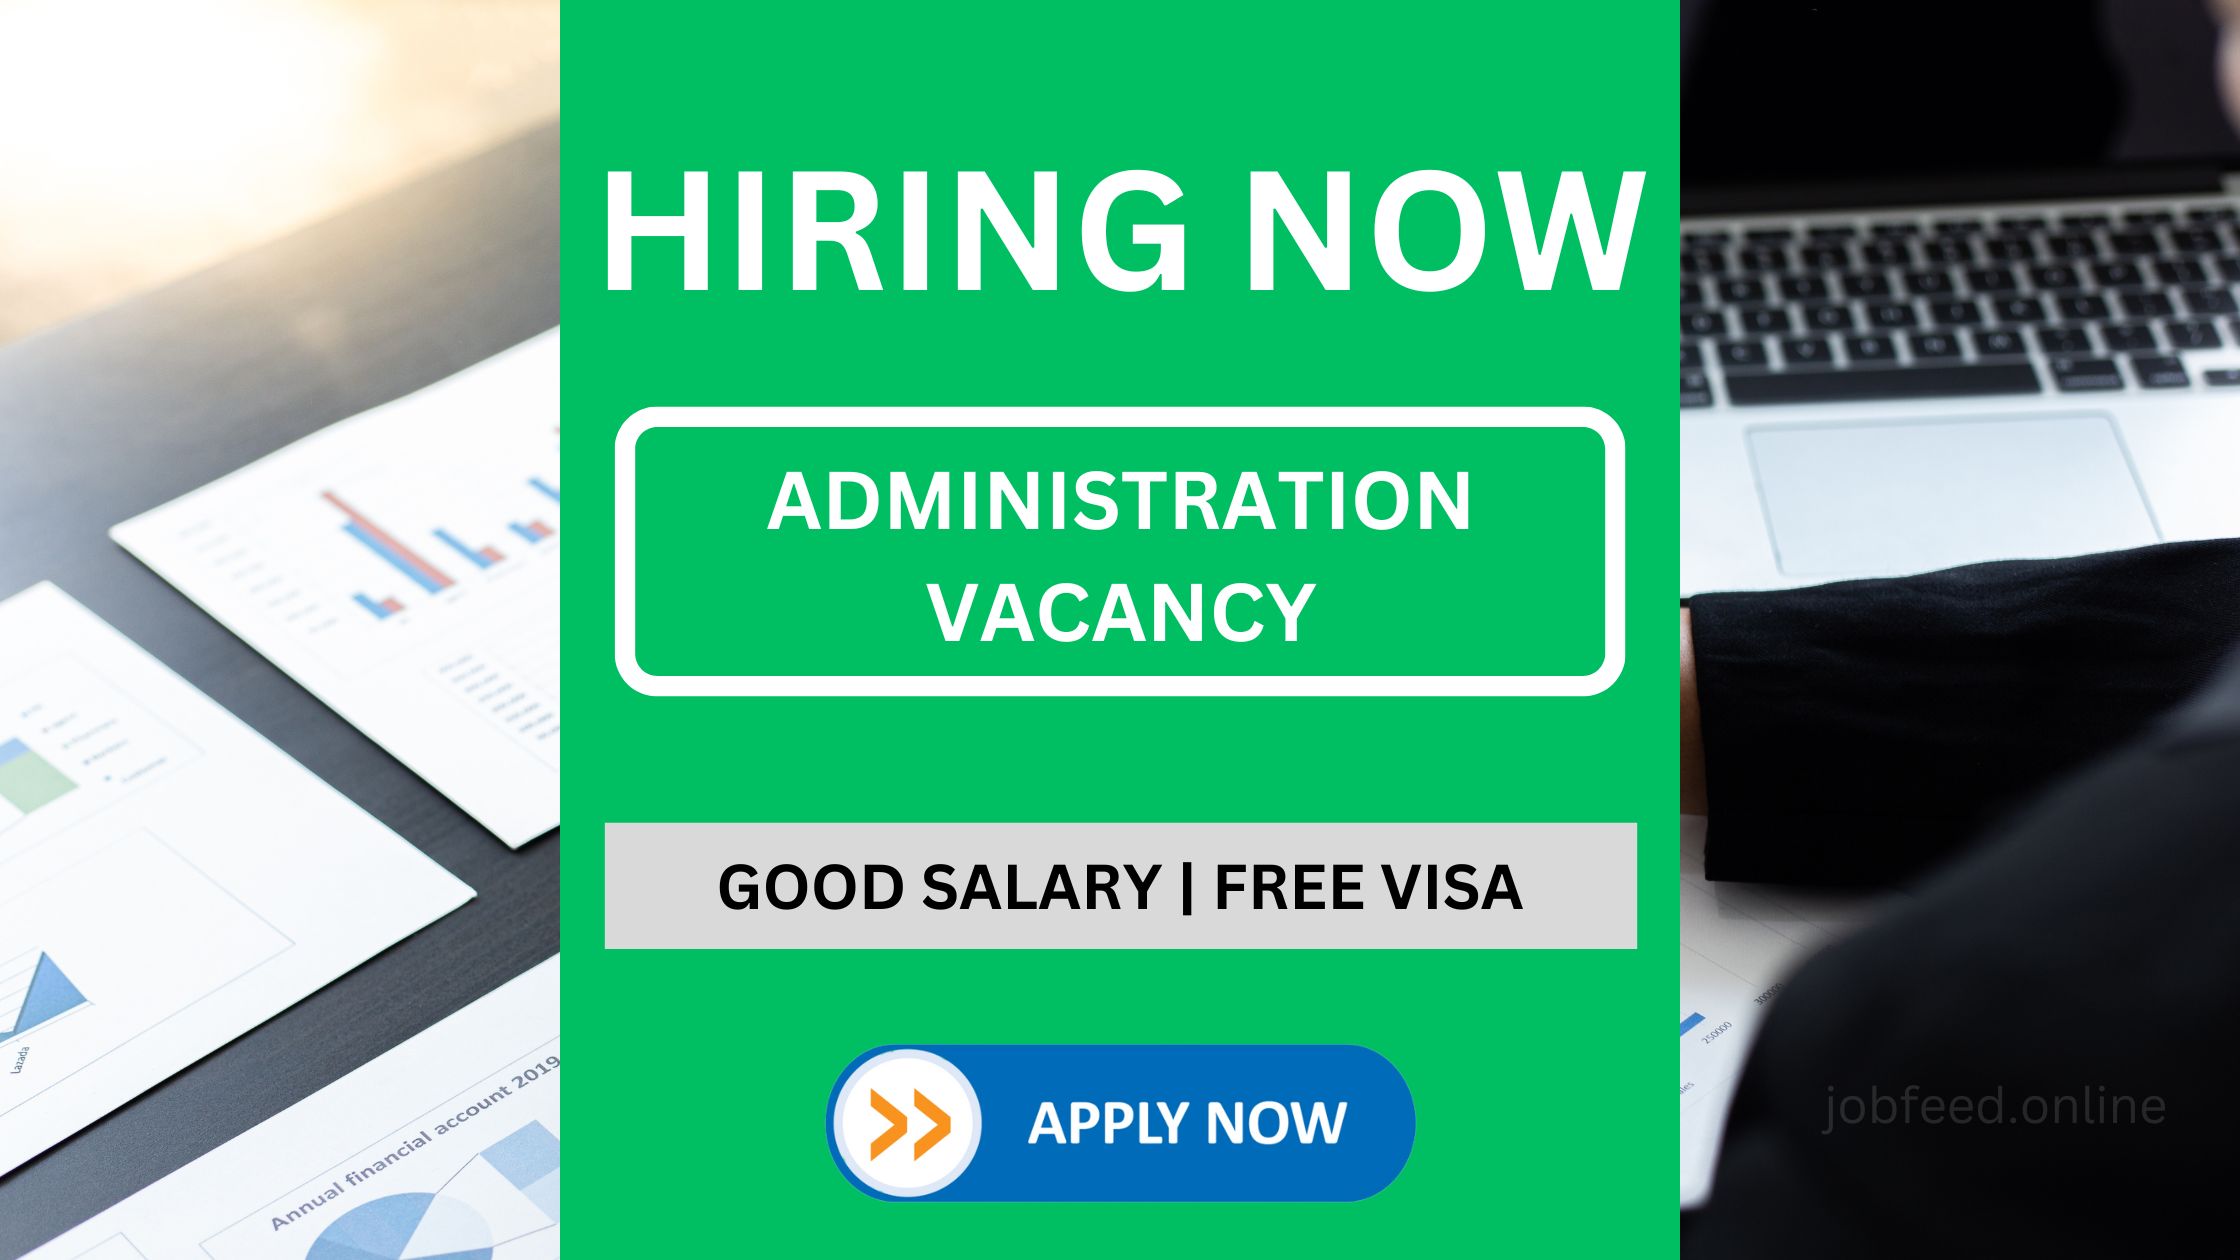 Hiring For Administration Vacancy - Check Qualification and Apply Online